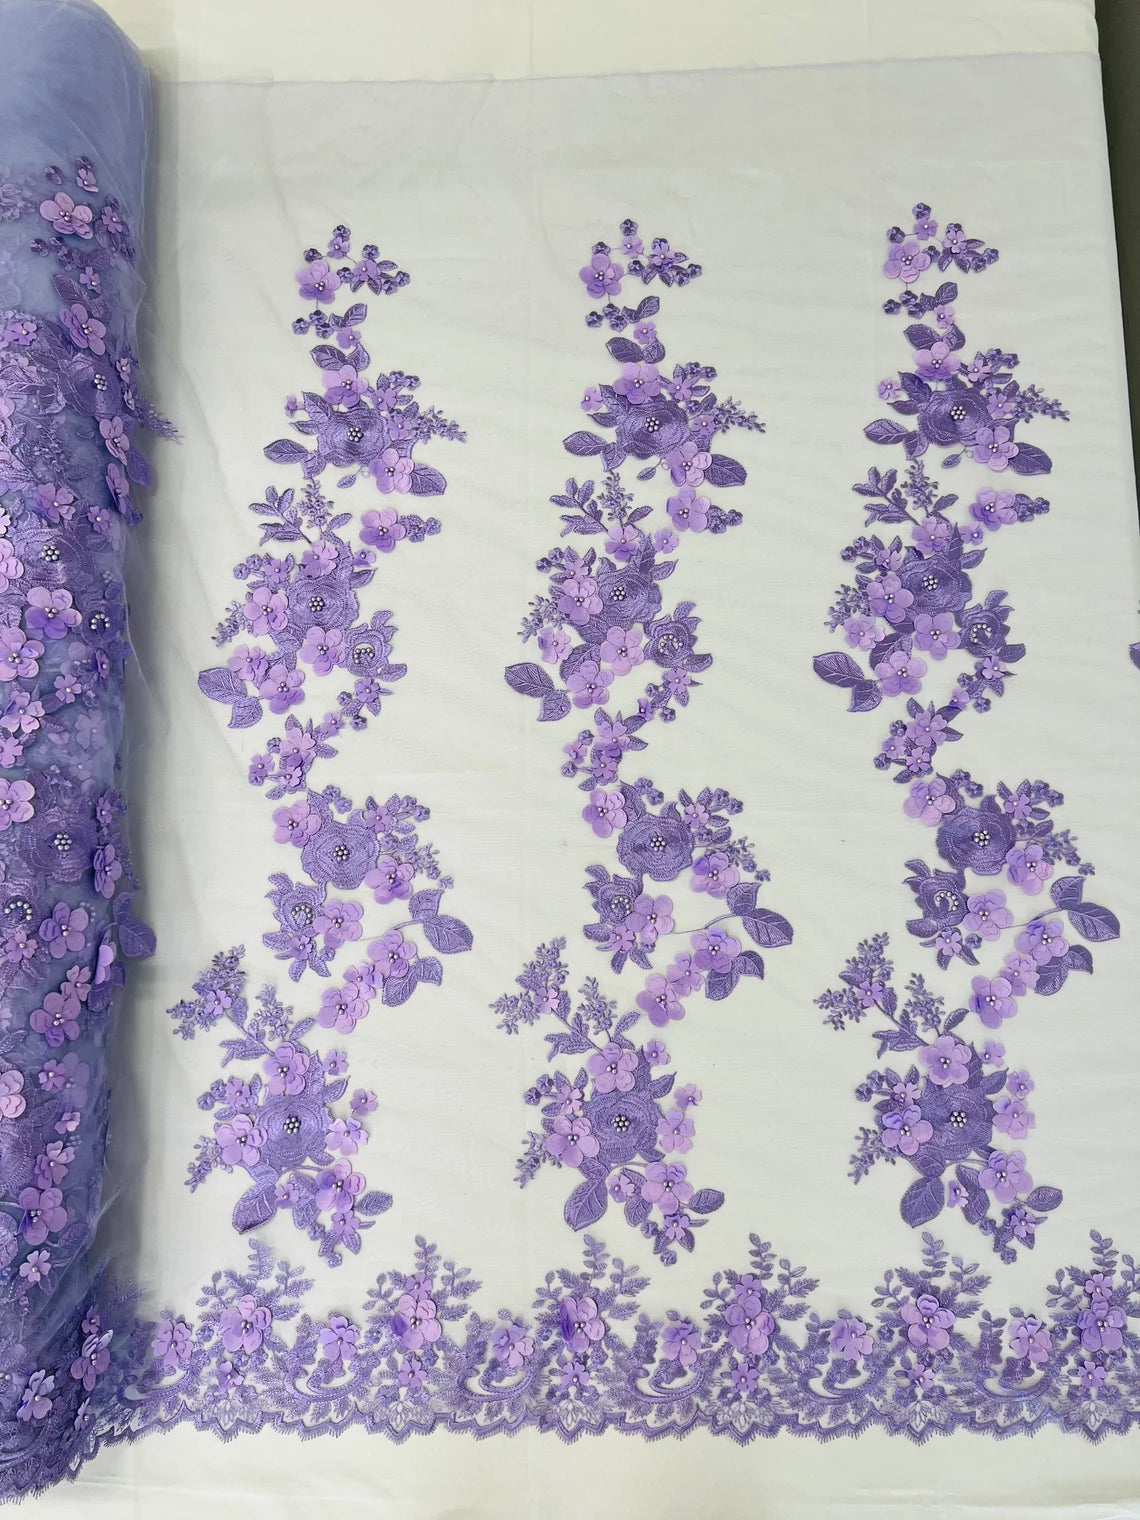 3D Flower Panels Fabric - Lavender - Flower Panels Bead Embroidered on Lace Fabric Sold By Yard